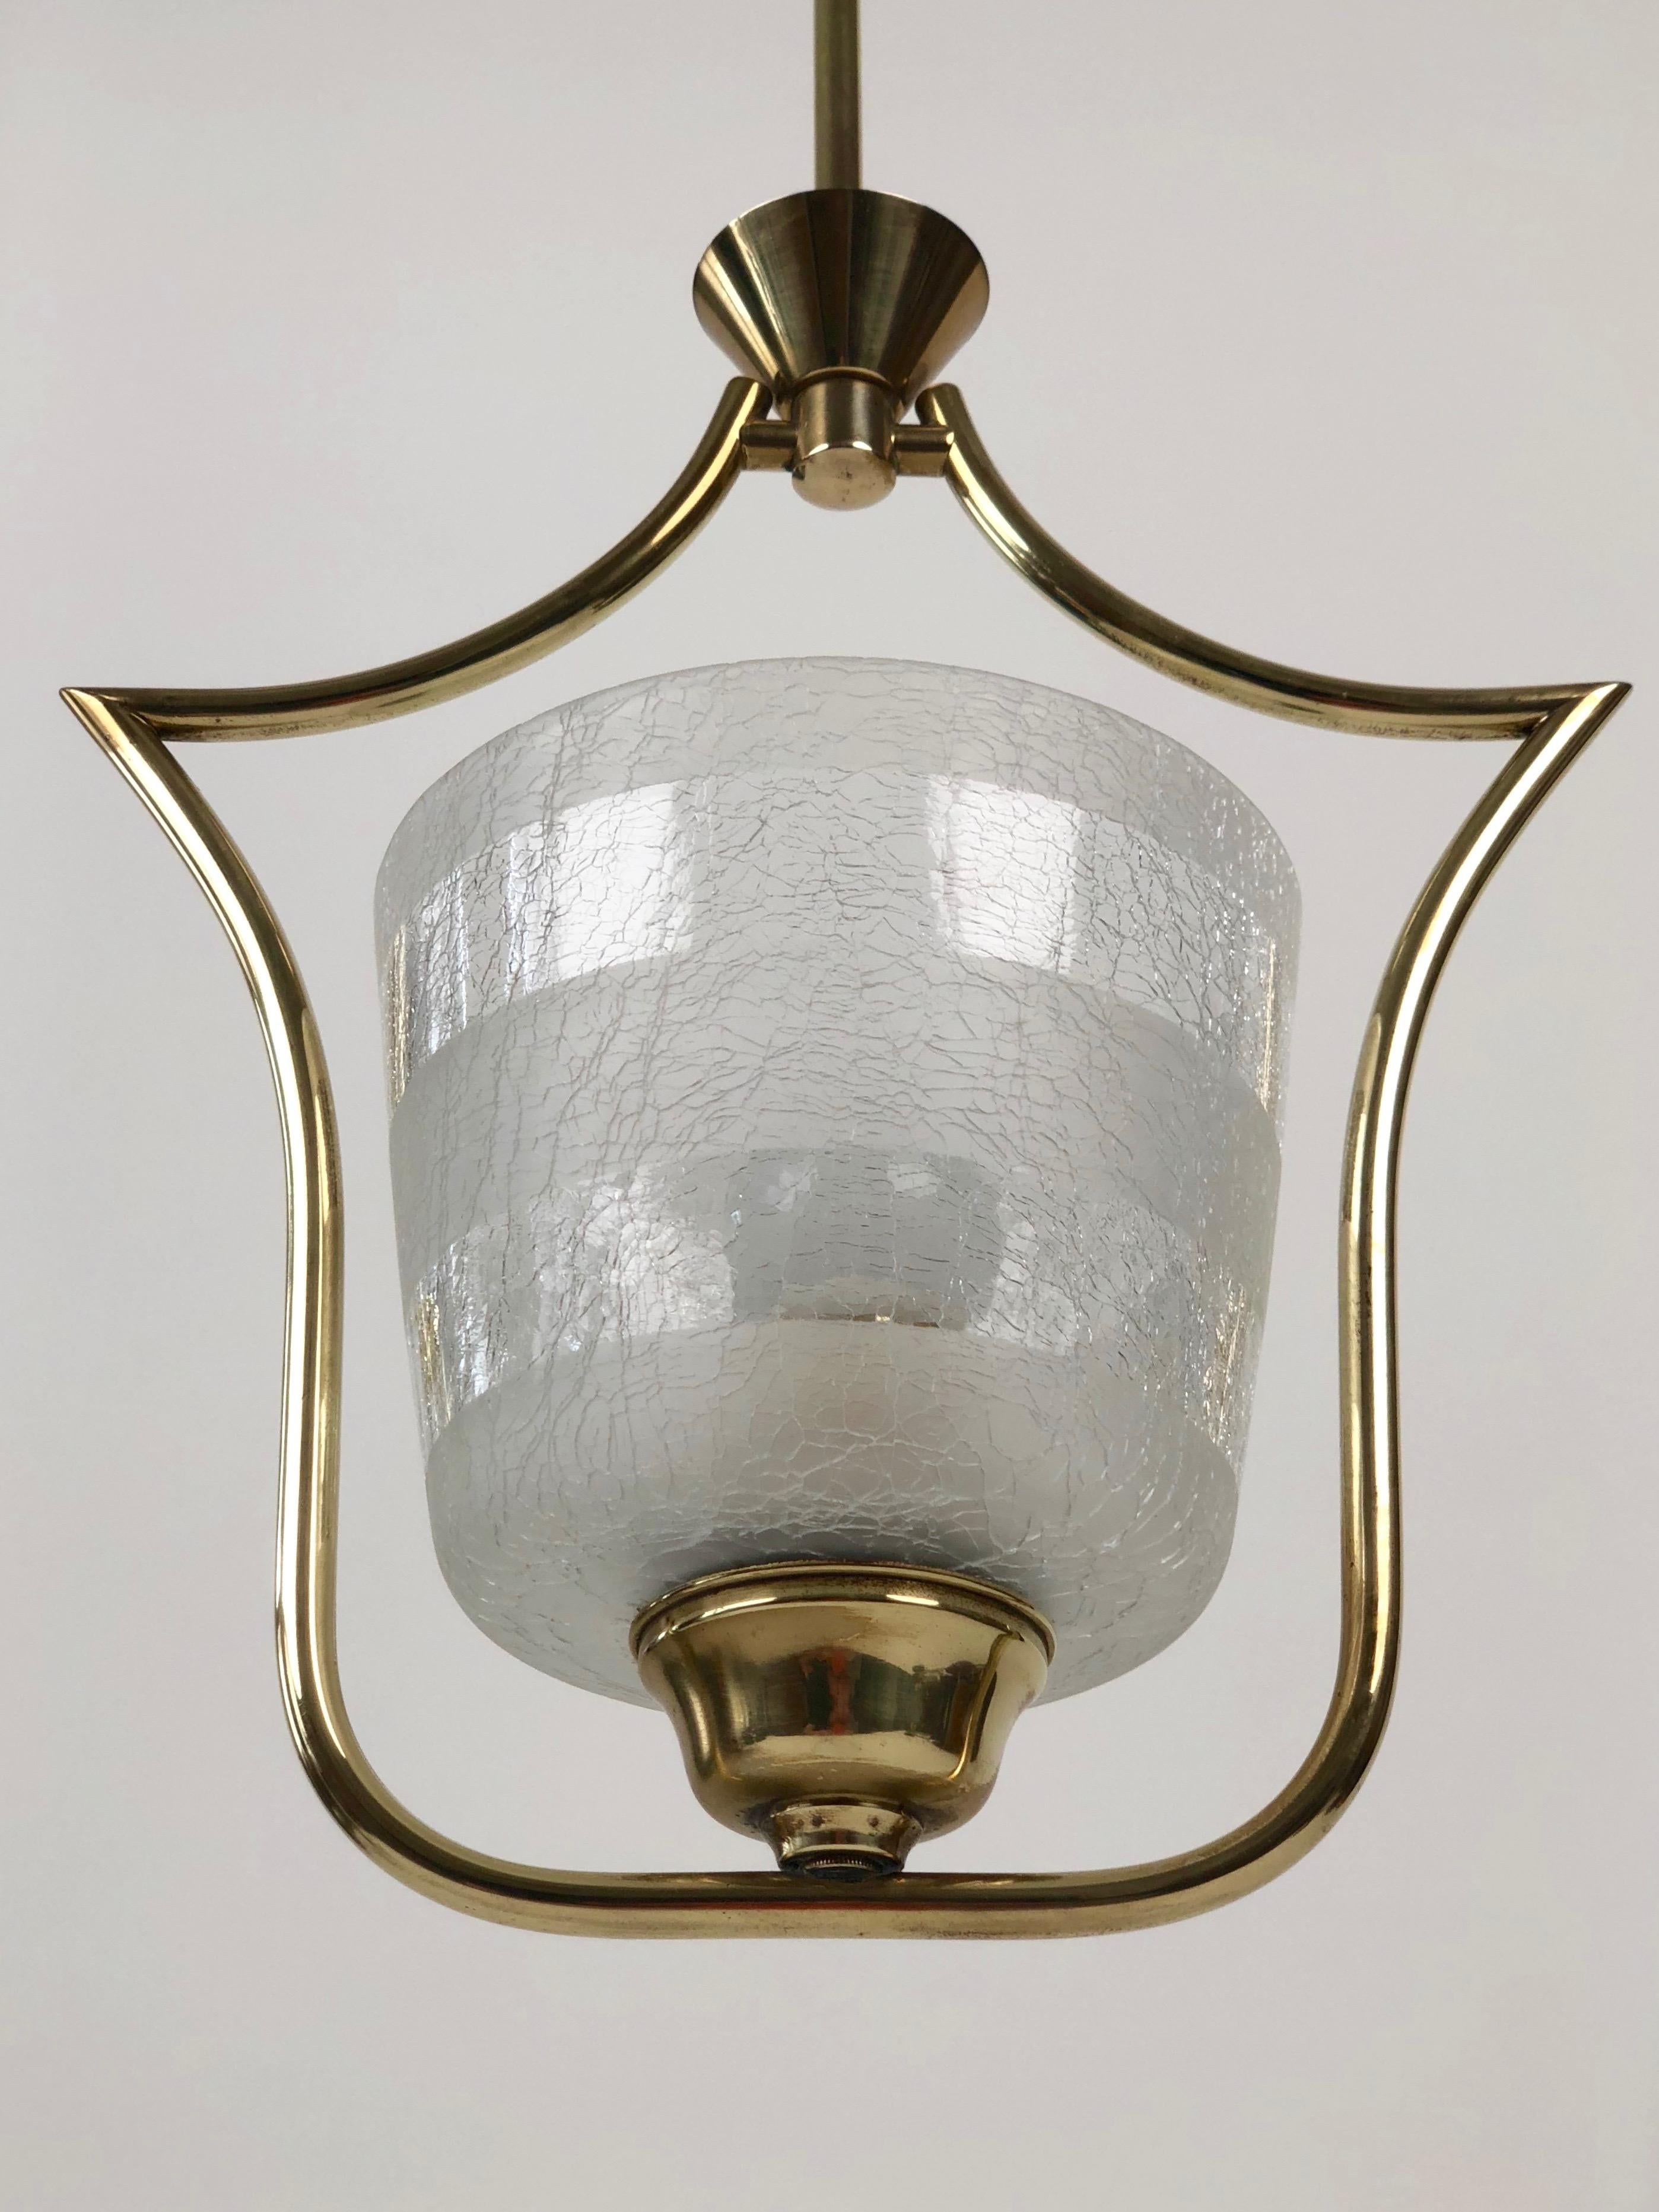 Hollywood Regency Styled Pendant Lamp in Brass and Glass, from Austria, 1950s For Sale 4